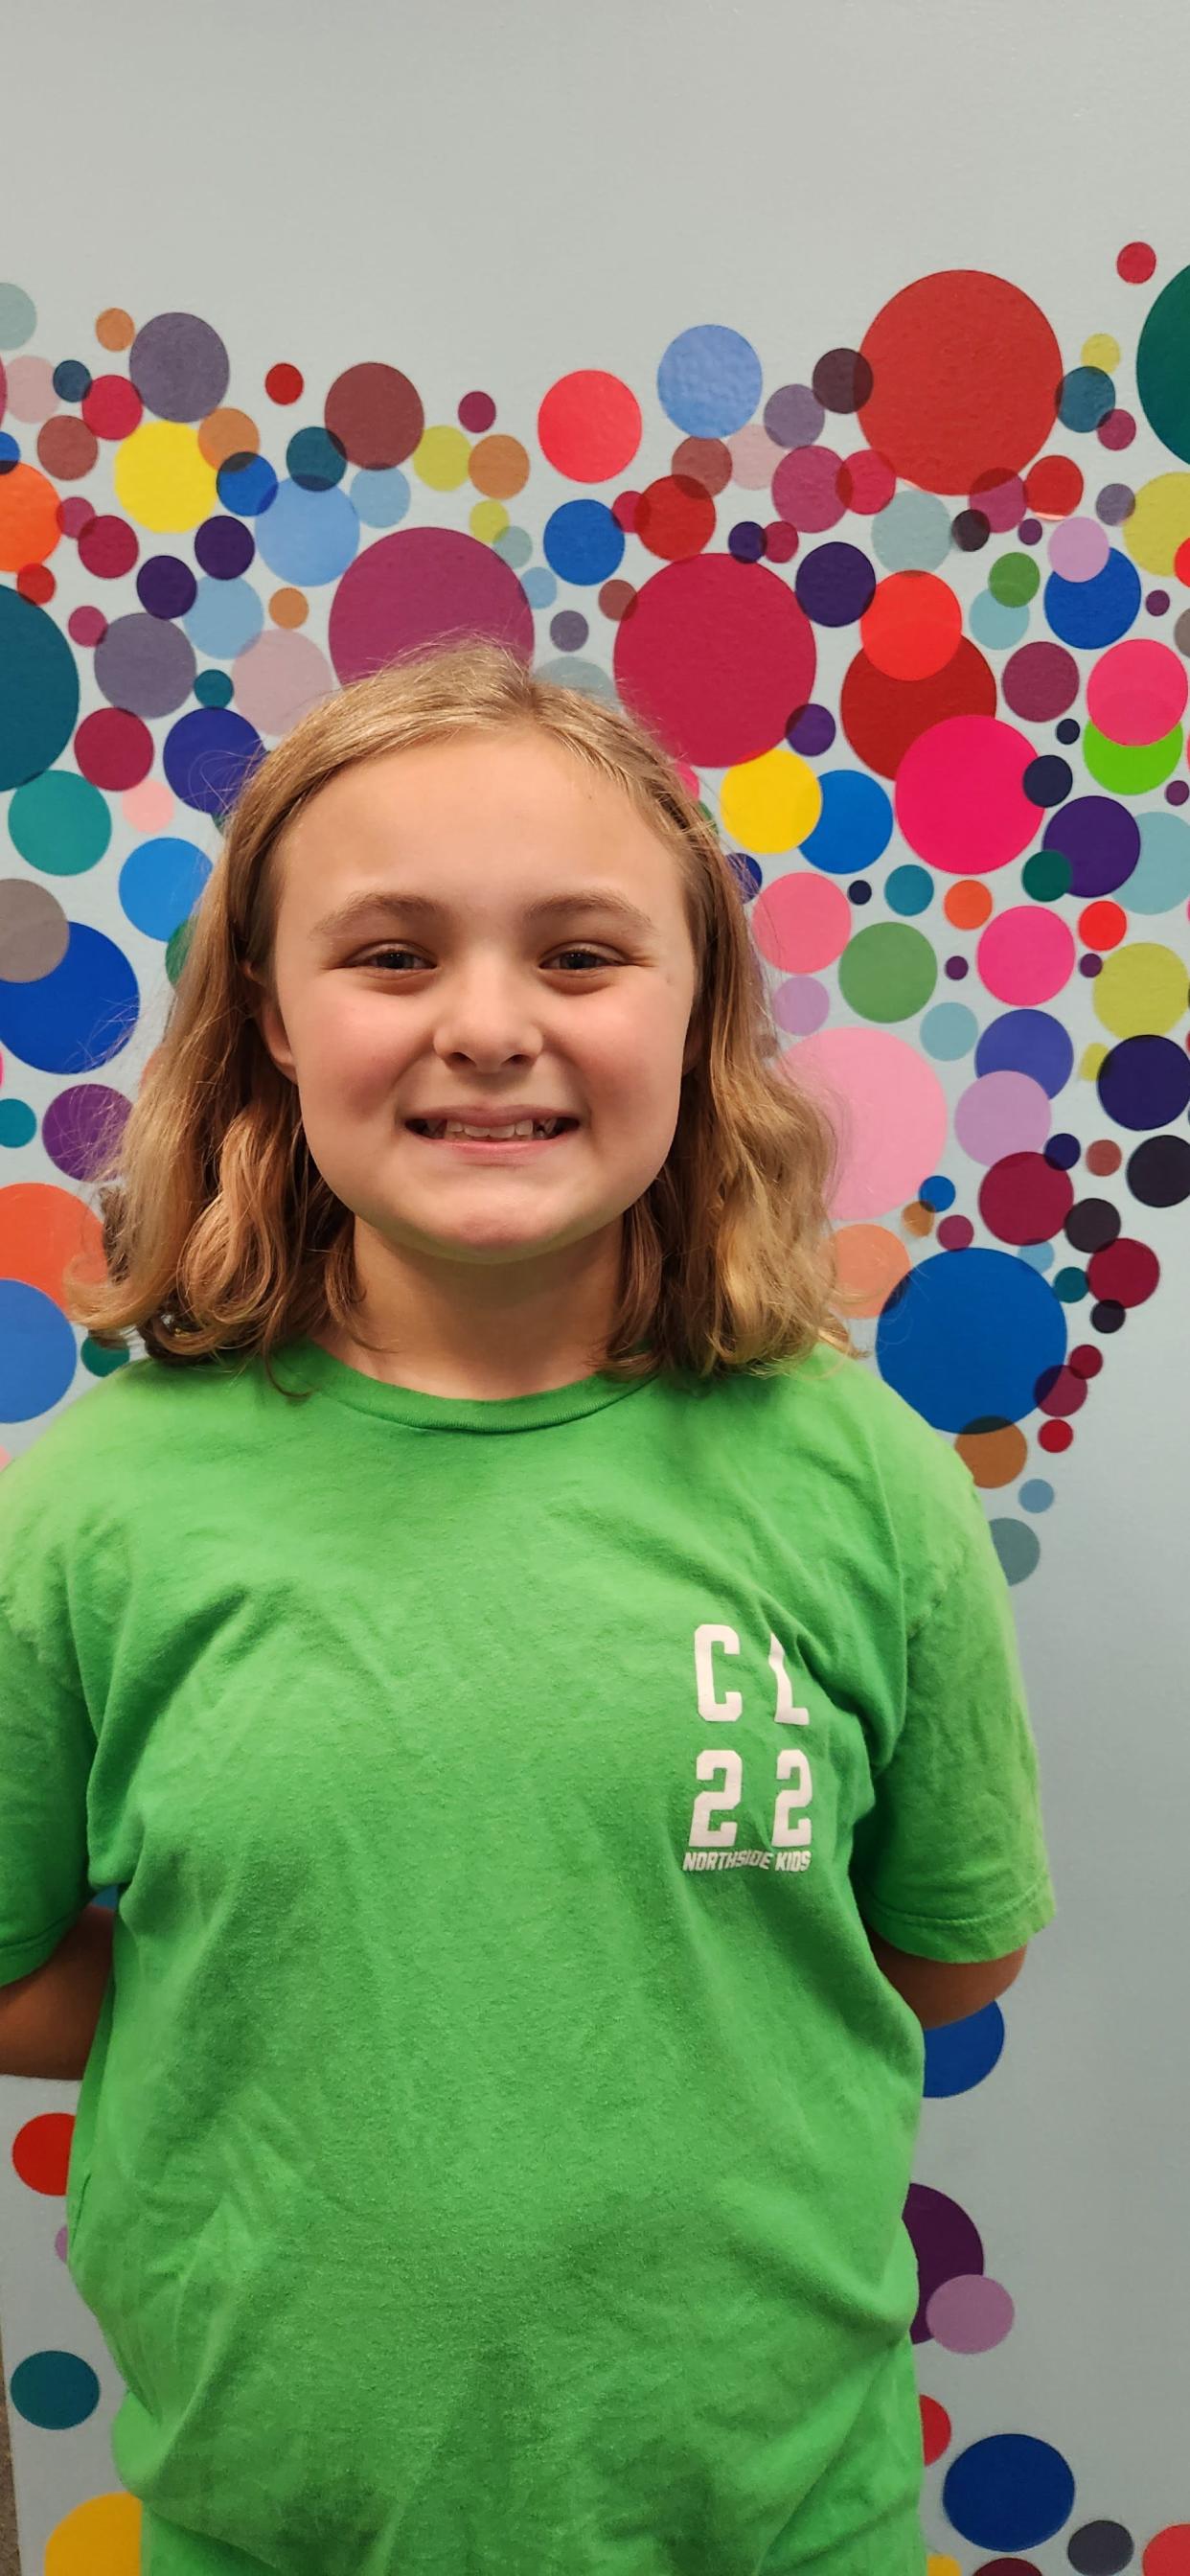 Kasay Capps of Castle Hayne Elementary School is New Hanover County Schools' Student of the Week.